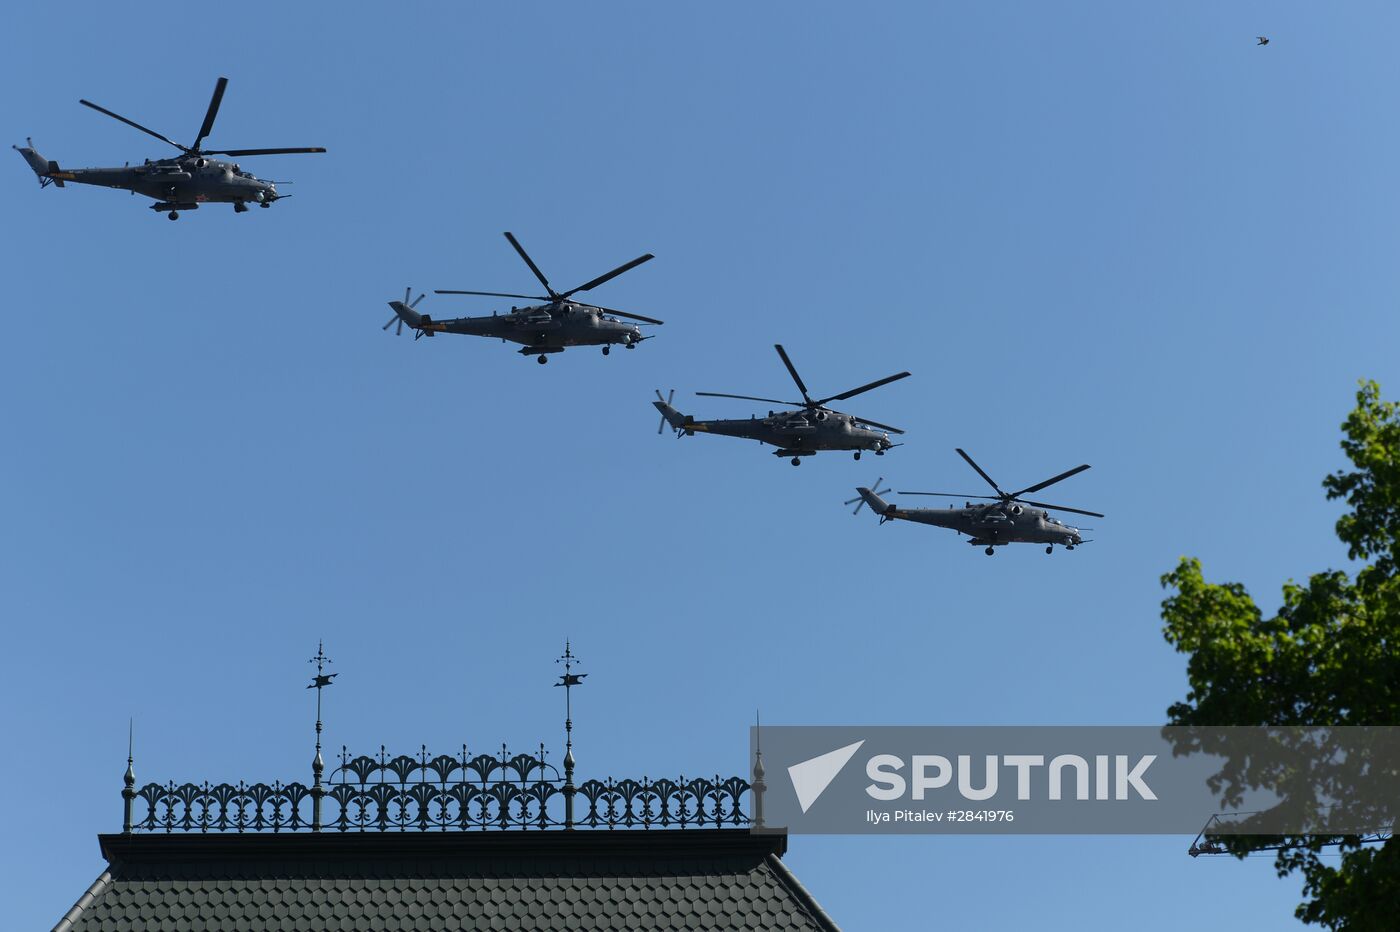 Military parade to mark 71st anniversary of Victory in 1941-1945 Great Patriotic War